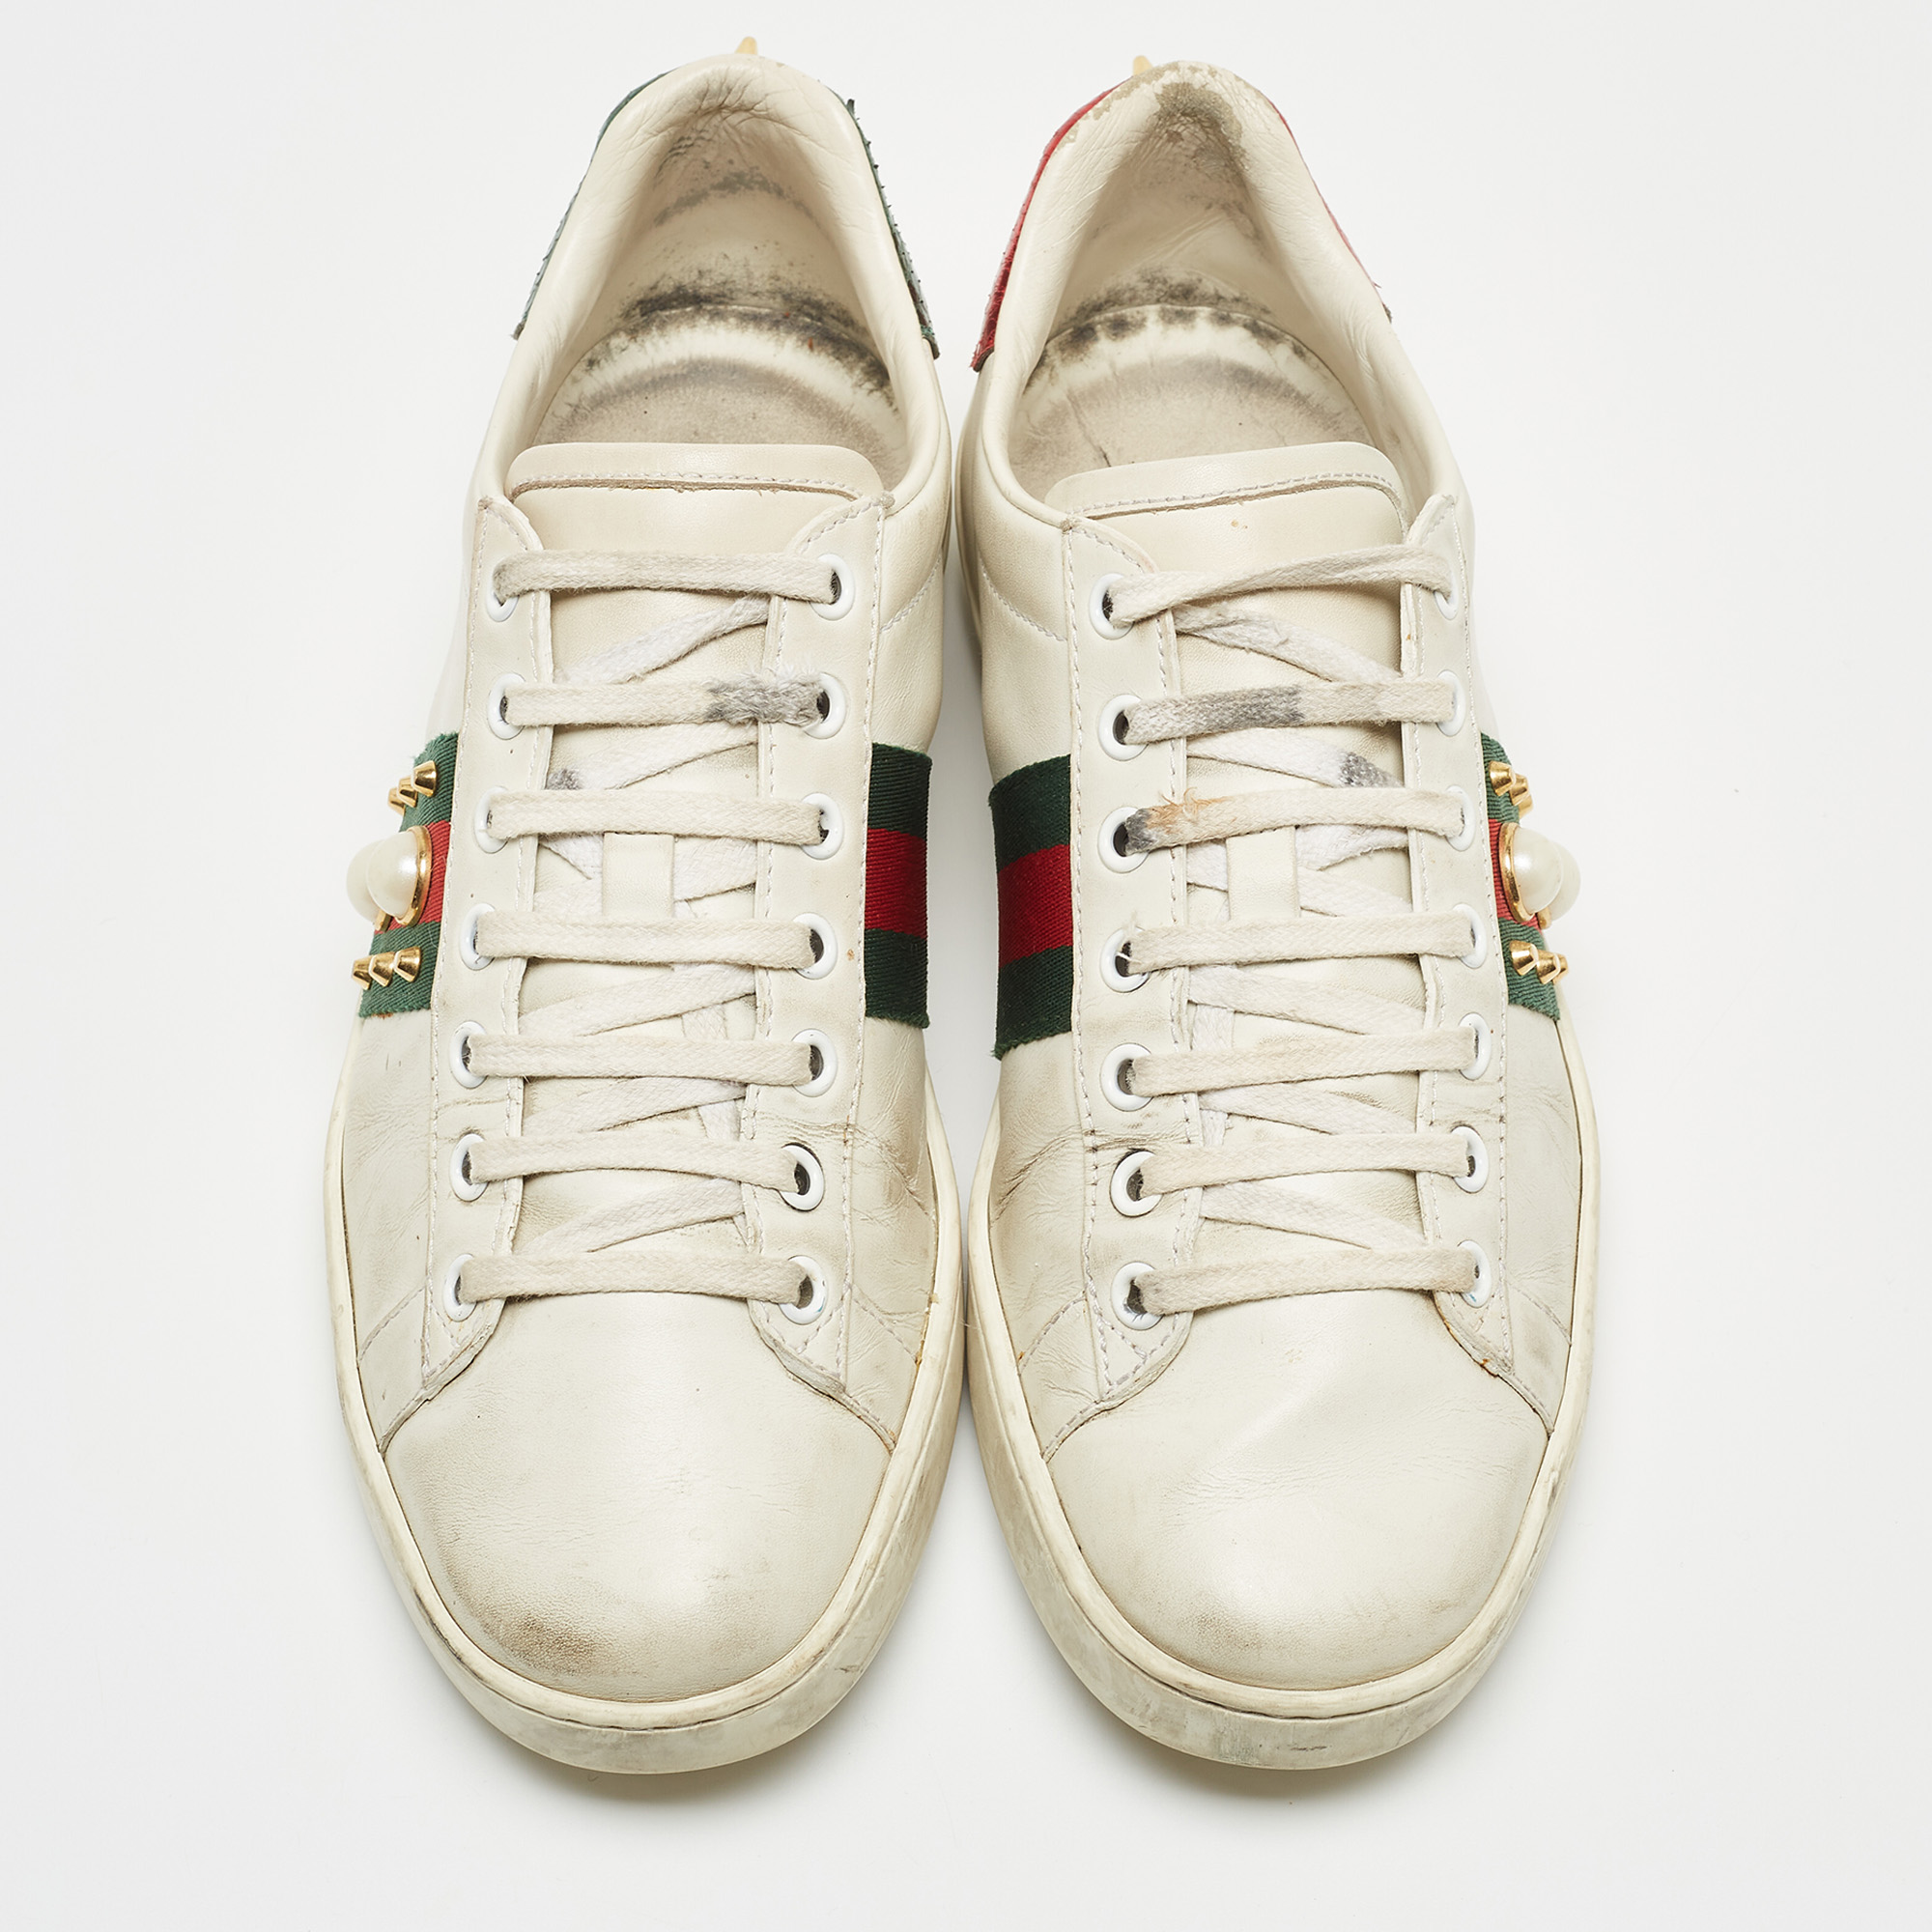 Gucci White Leather Pearl Embellished And Spiked Ace Sneakers Size 38